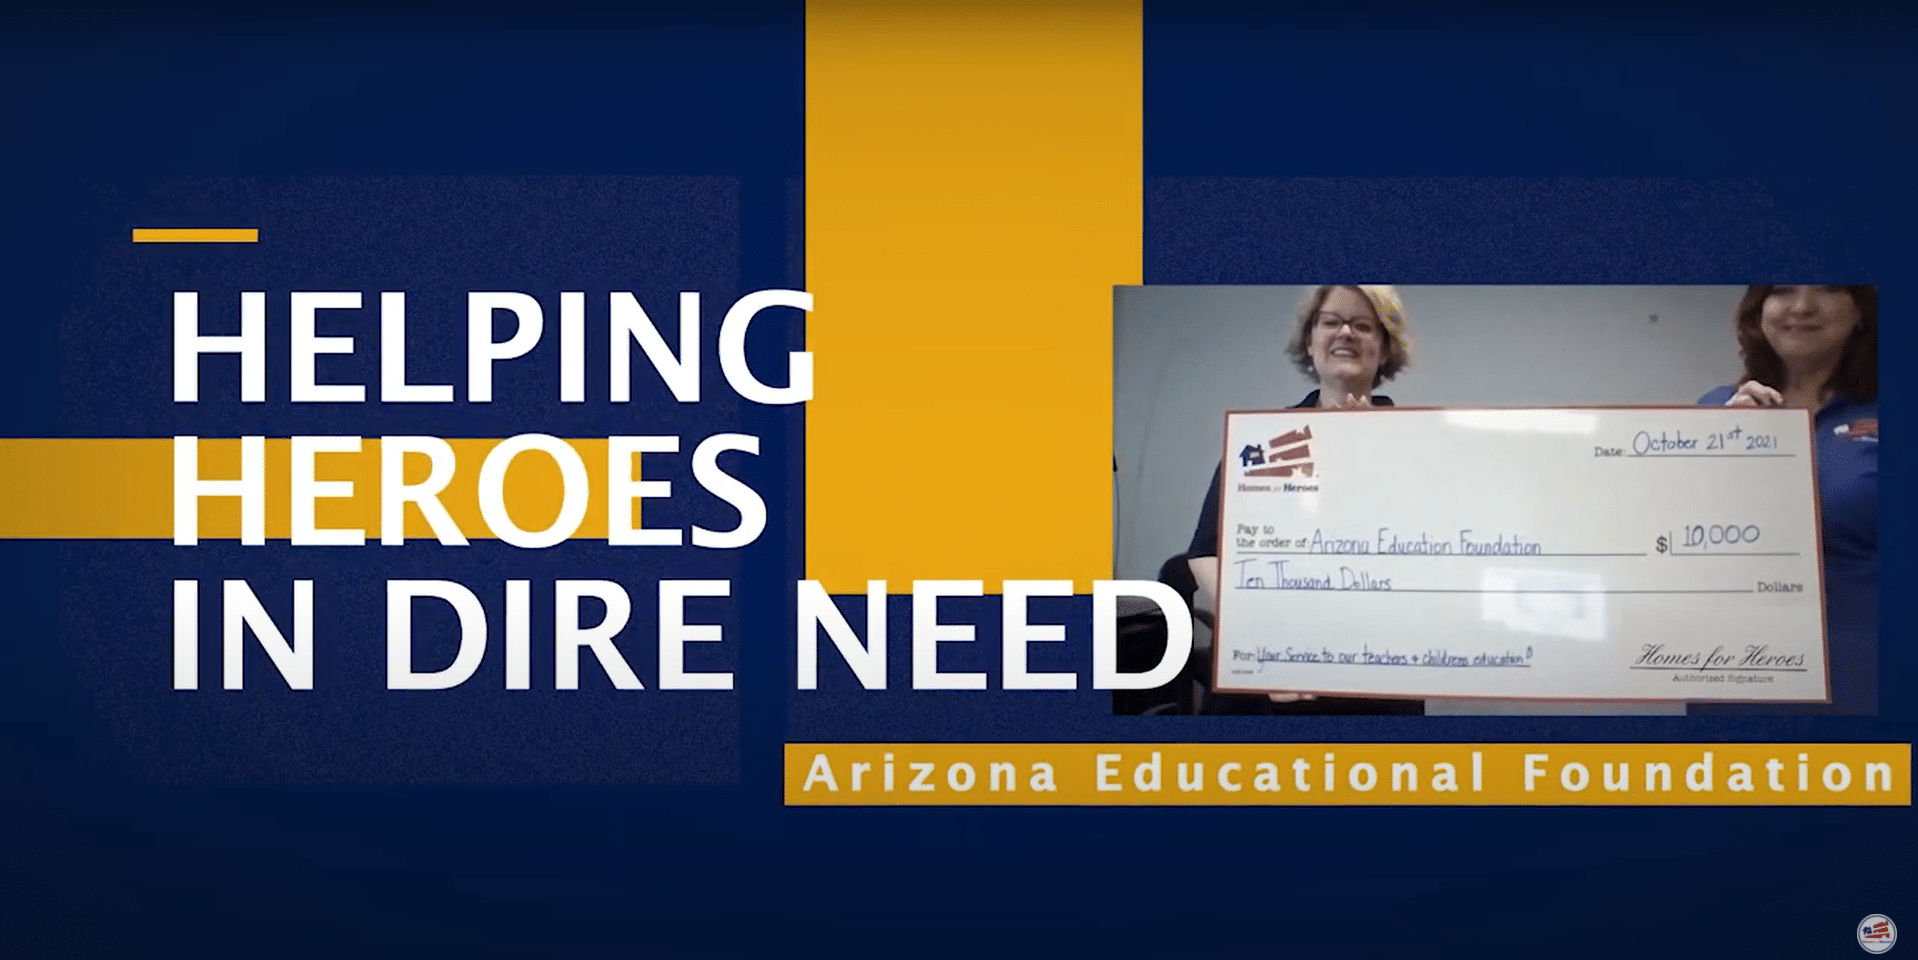 Text overlay that reads "Helping Heroes in Dire Need" next to an image of Kim Graham and Kendra Coverdale holding a giant check for $10,000 to the Arizona Educational Foundation